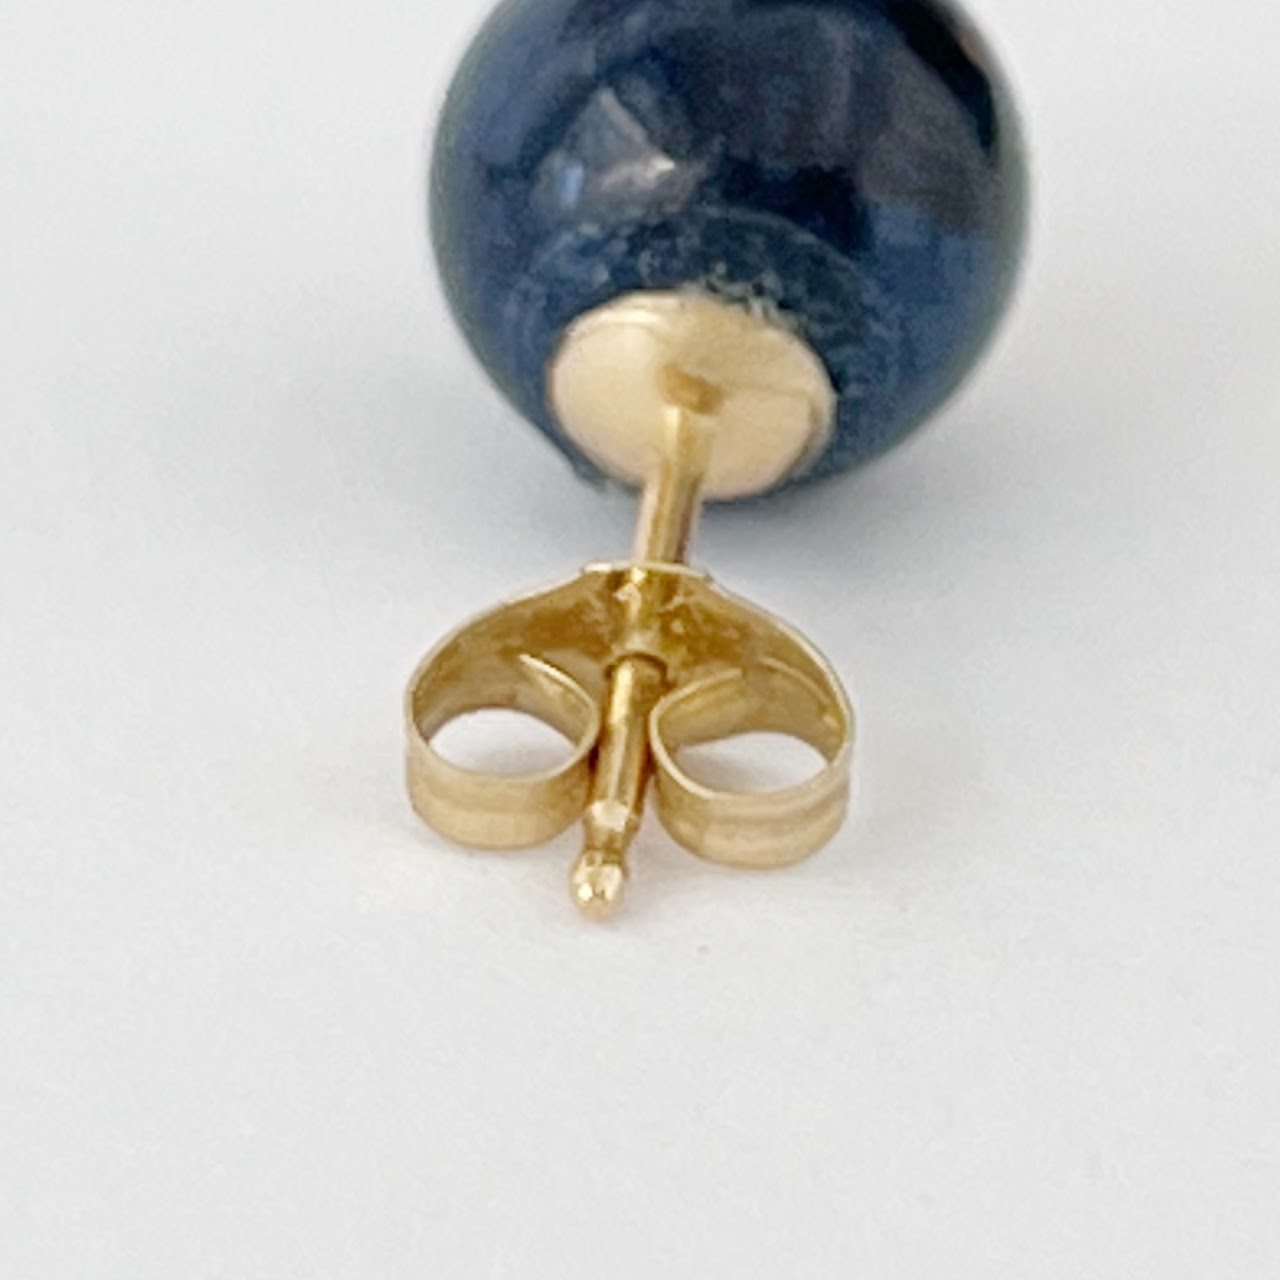 14K Gold and Blue Stone Earrings